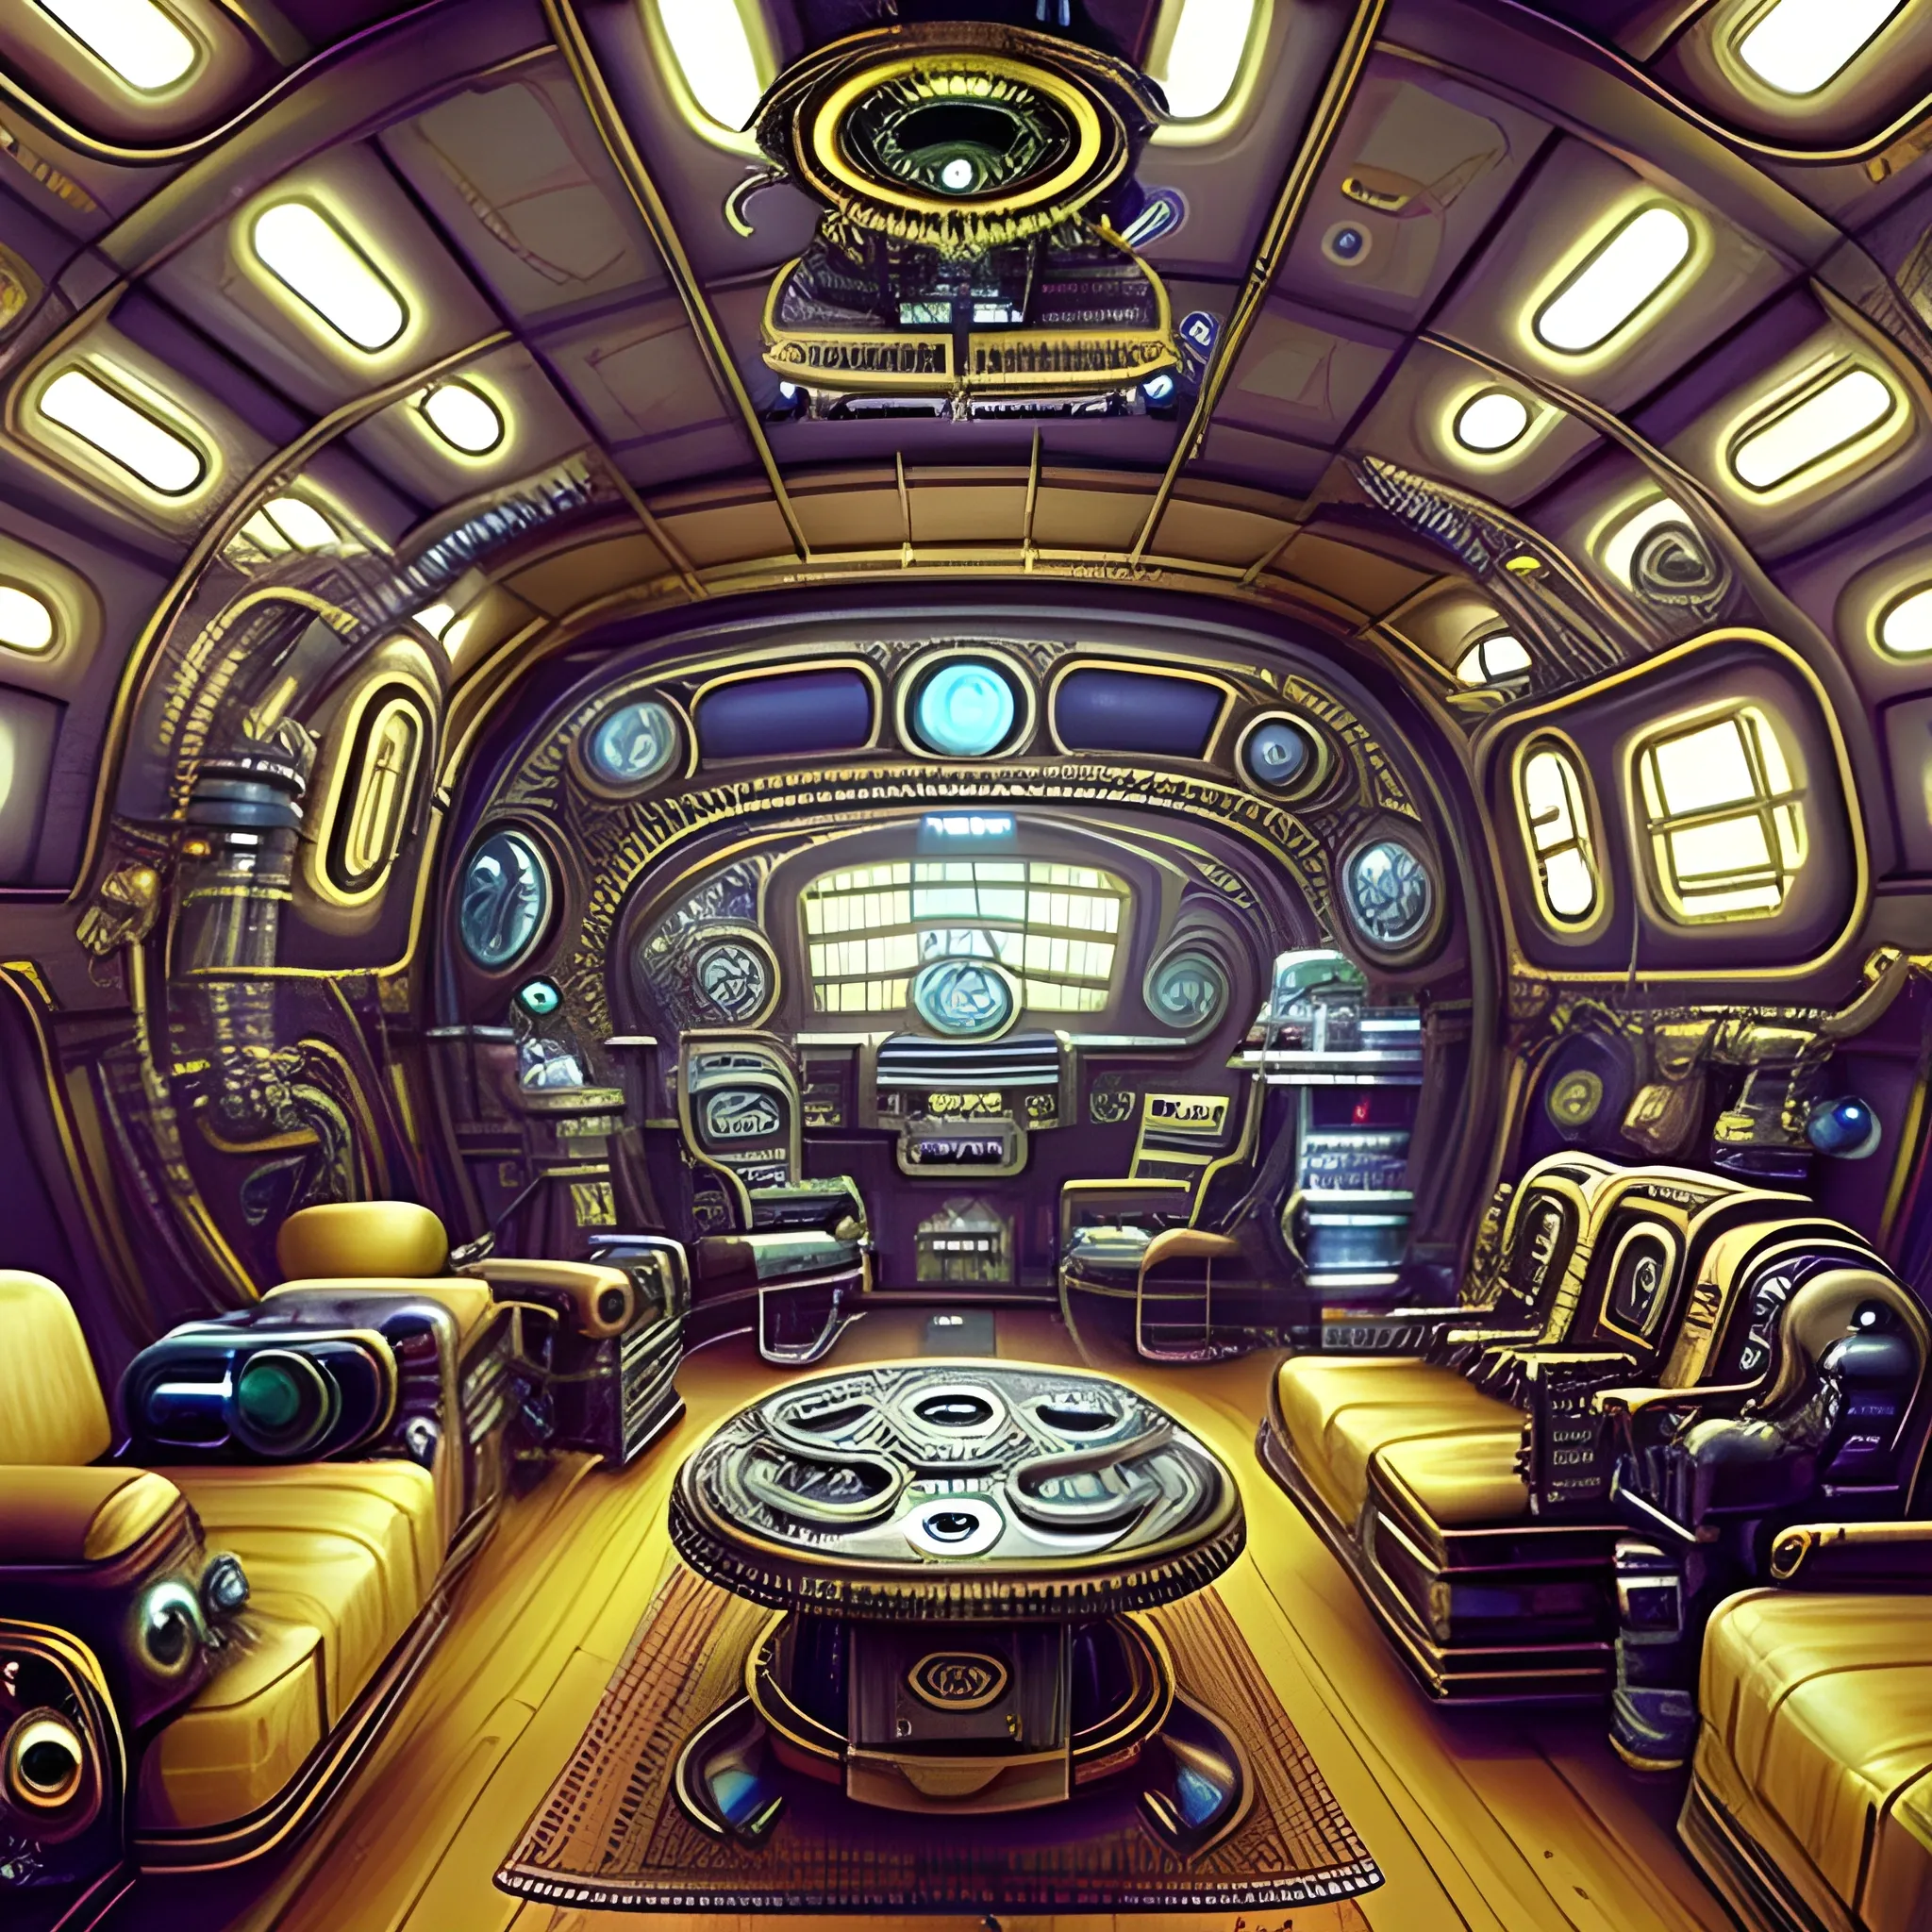 A vibrant cosmic background with a myriad of futuristic spaceships. The central focus is a large, circular space station with a unique, infinity-like shape. The central focus is a large, circular space station with a unique room.A luxurious (((steampunk-inspired))) 31st century alien living room.The house is powered by intricate machines inspired by Norman Rockwell . A 60" video screen, in the wall. Facing the alien family sitting on their couch.A starship made from the following: a beat up old washer, MRI Machine, Giant Cast Iron Wood Stove, 1934 Winnebago, tons of duct tape, odd vehicle parts, 2 large shipping containers,1924 Deusenberg, a 1934 Winnebago, tons of duct tape, odd vehicle parts, two large shipping containers, and a 1924 Deusenberg.